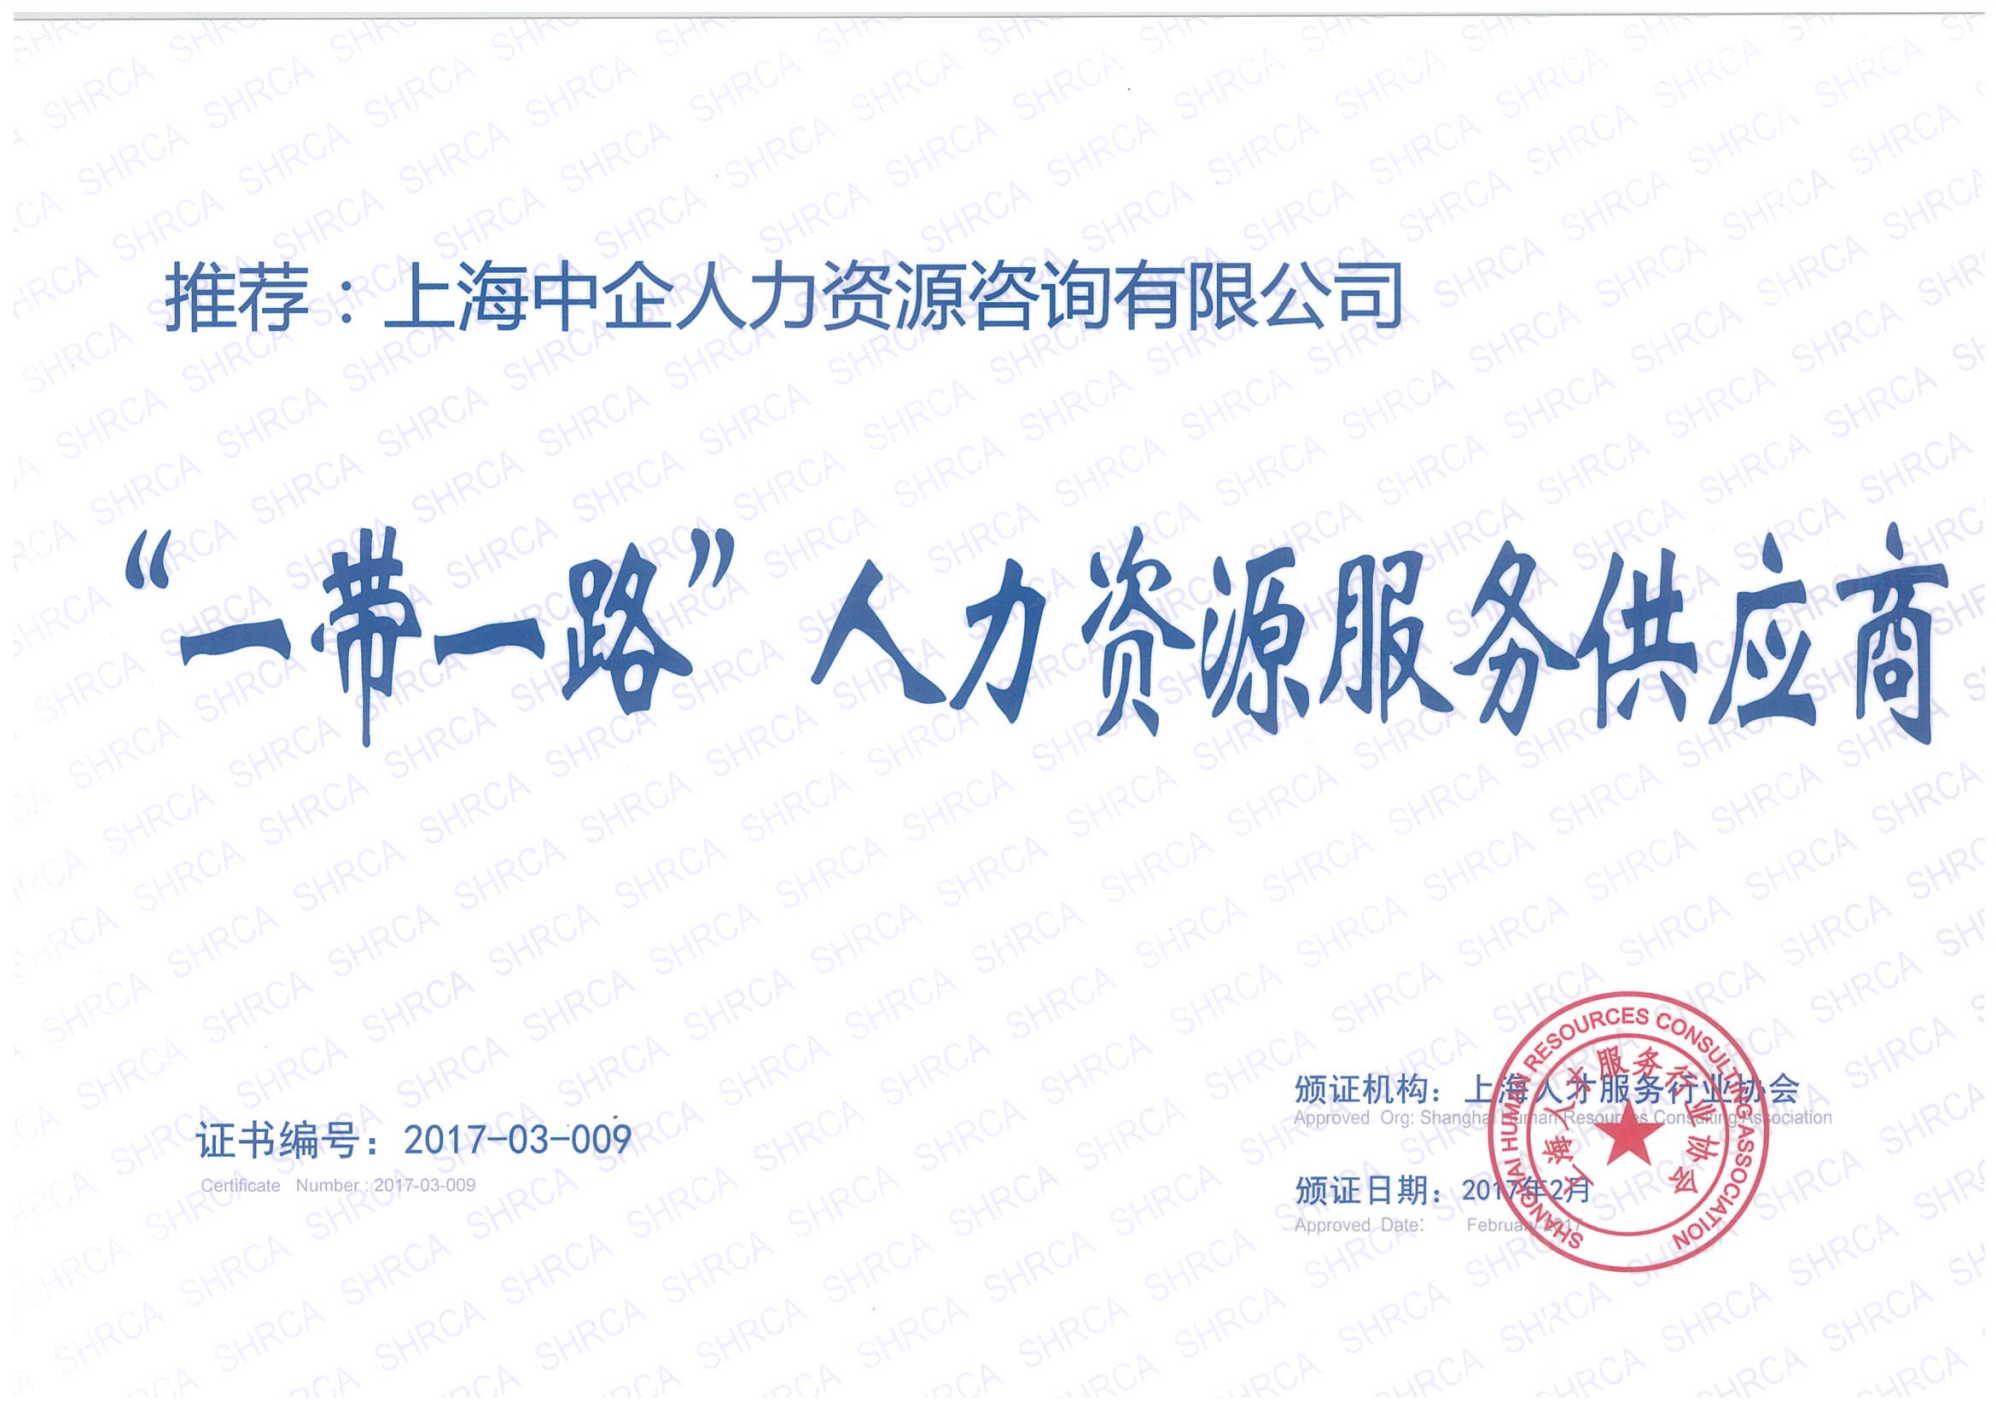 The Belt and Road supplier certificate.jpg